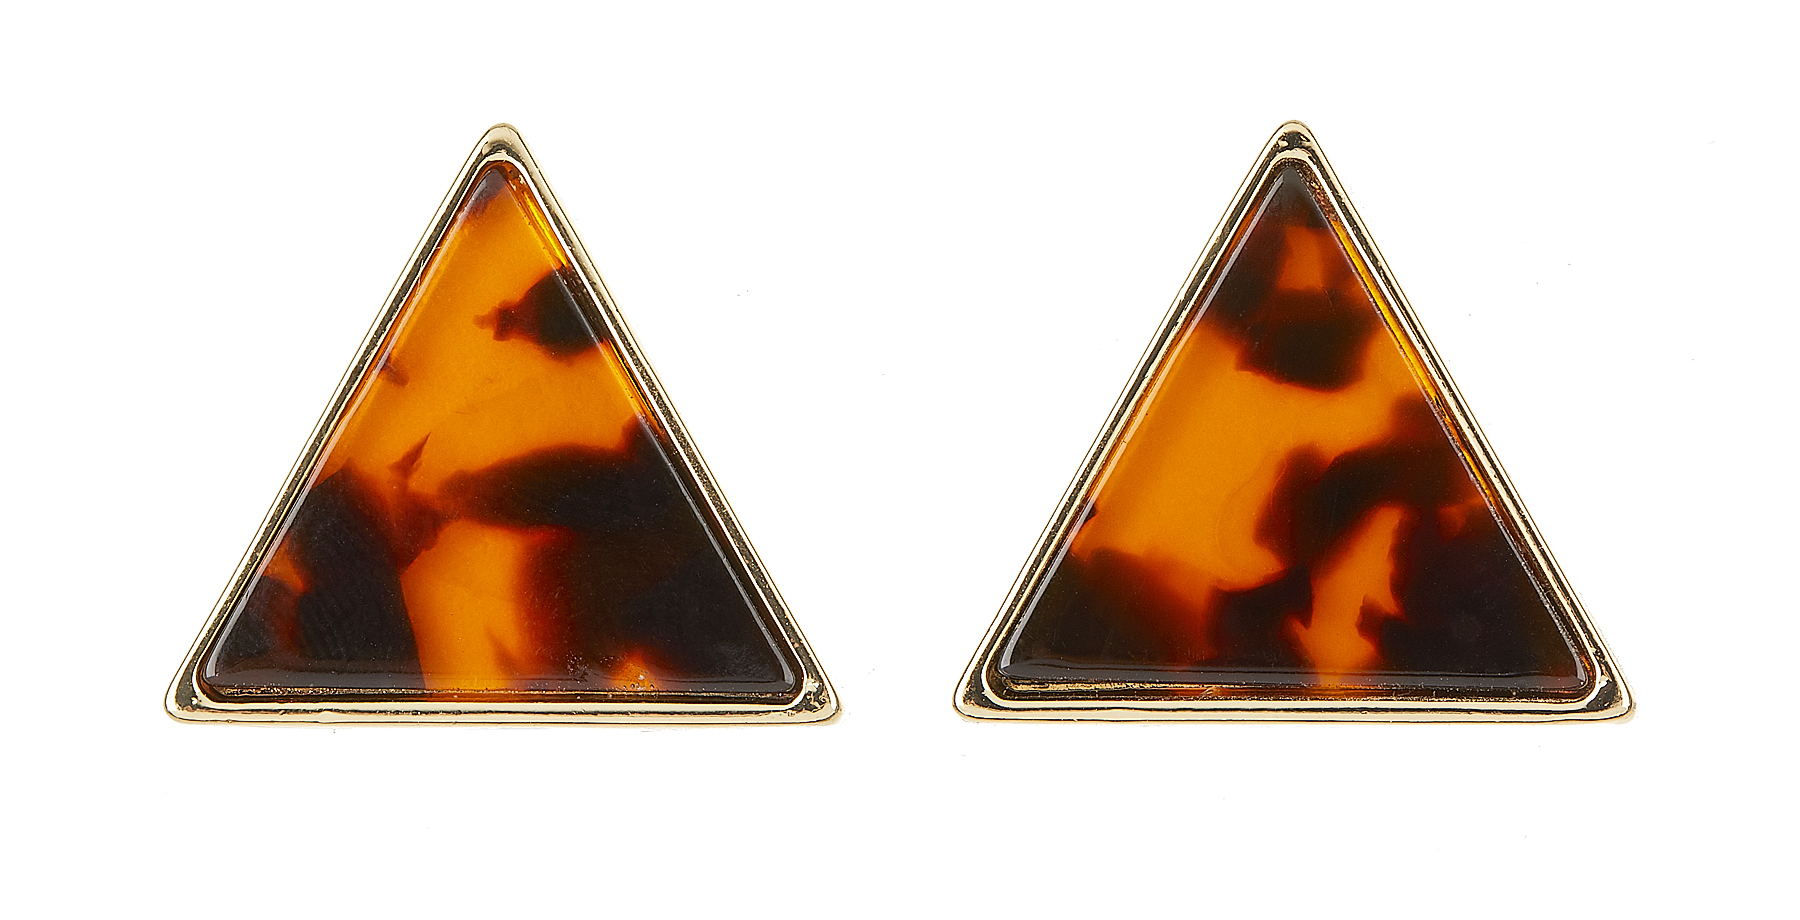 Clip On Earrings - Enid - gold triangle stud earring inset with brown tortoise shell acrylic